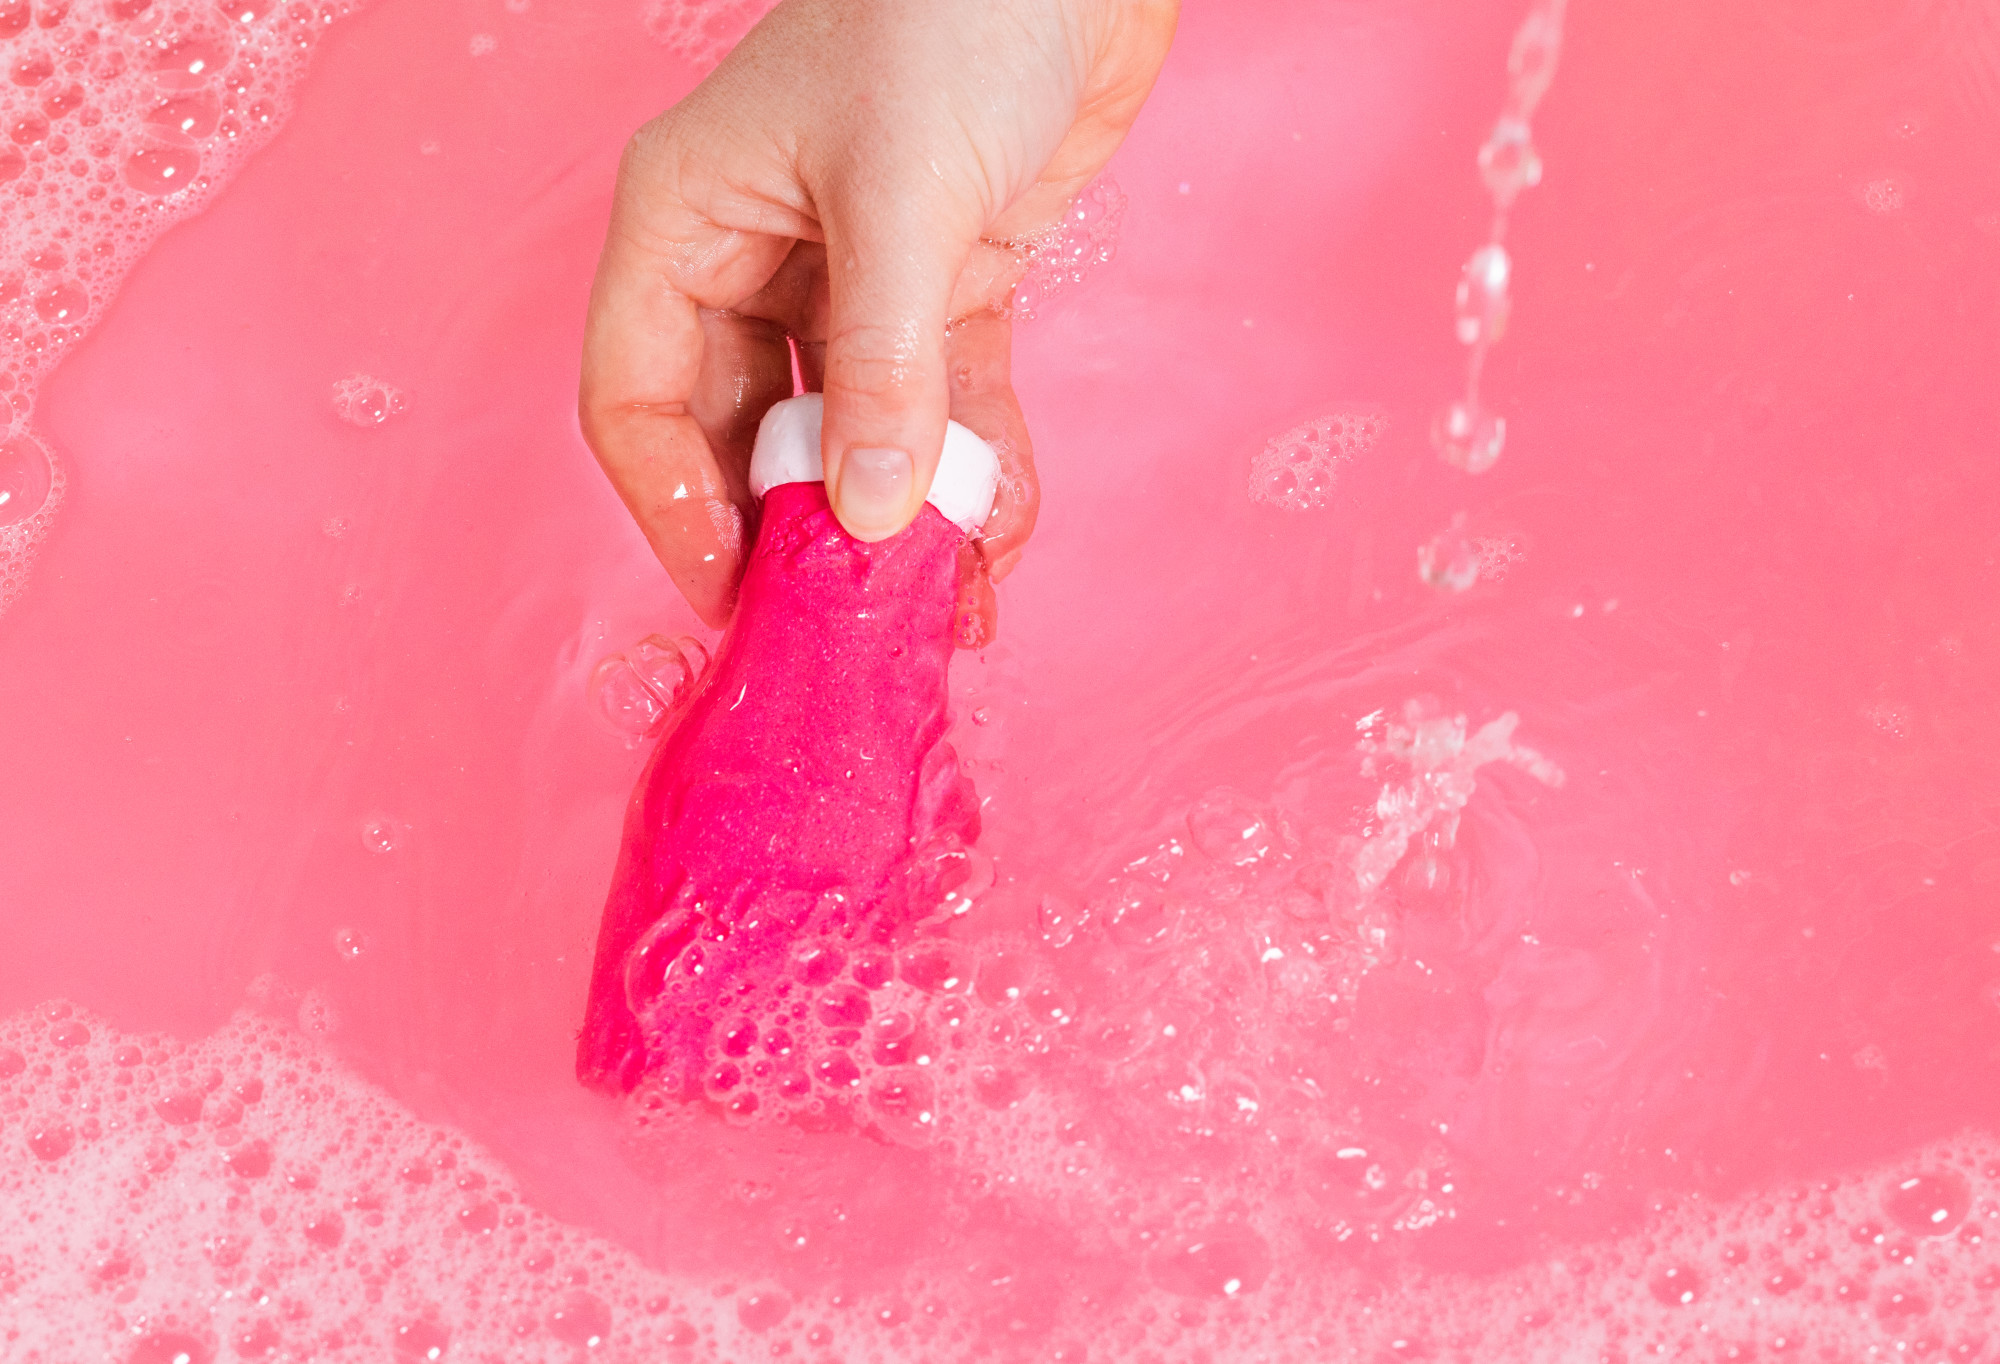 Pink Dirty being held near its white wax 'lid' and run through candy pink water, with bubbles trailing behind.